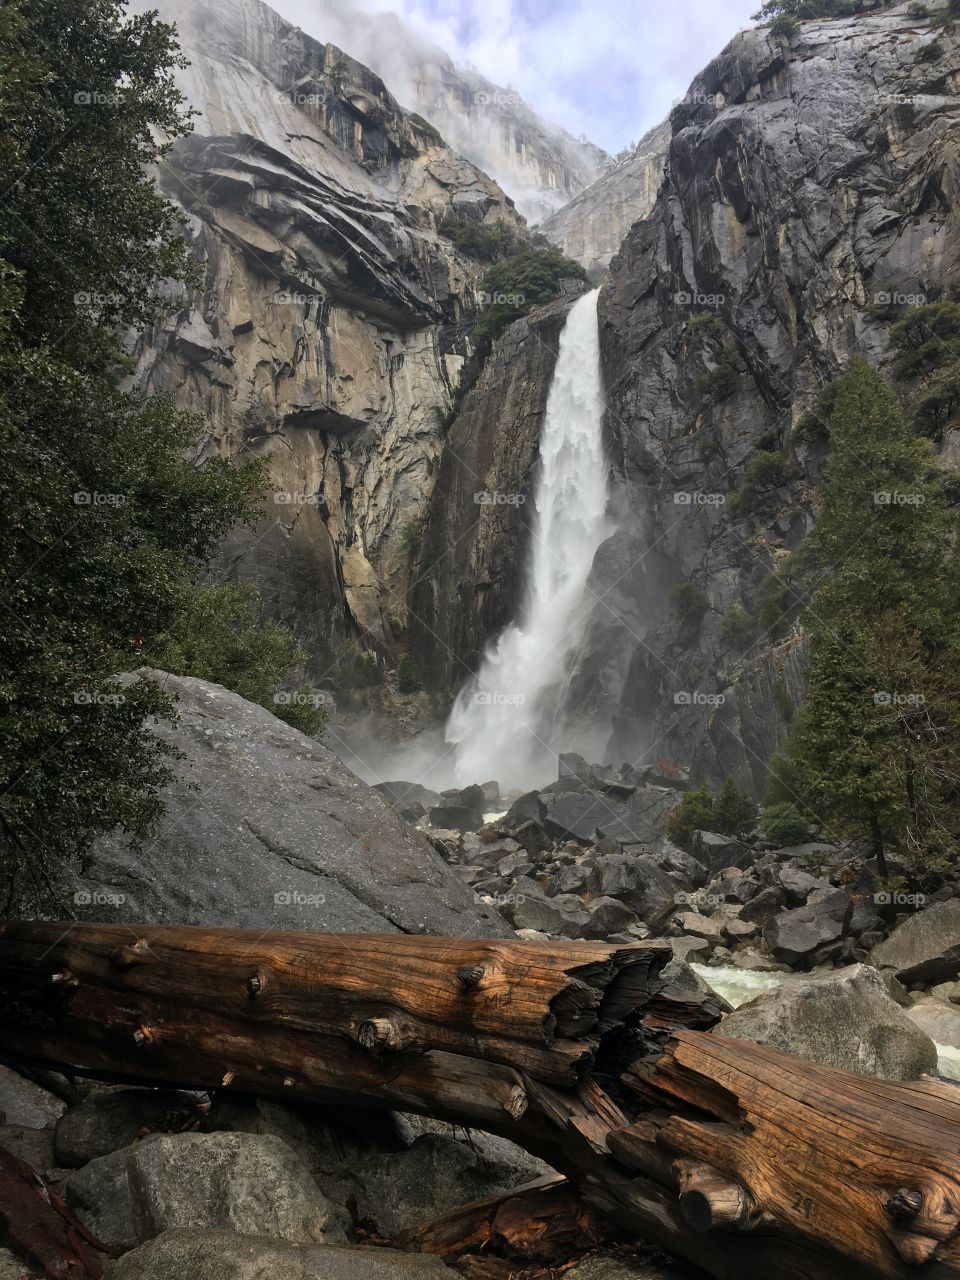 Beautiful waterfall with a fallen tree draped in the foreground in Yosemite!